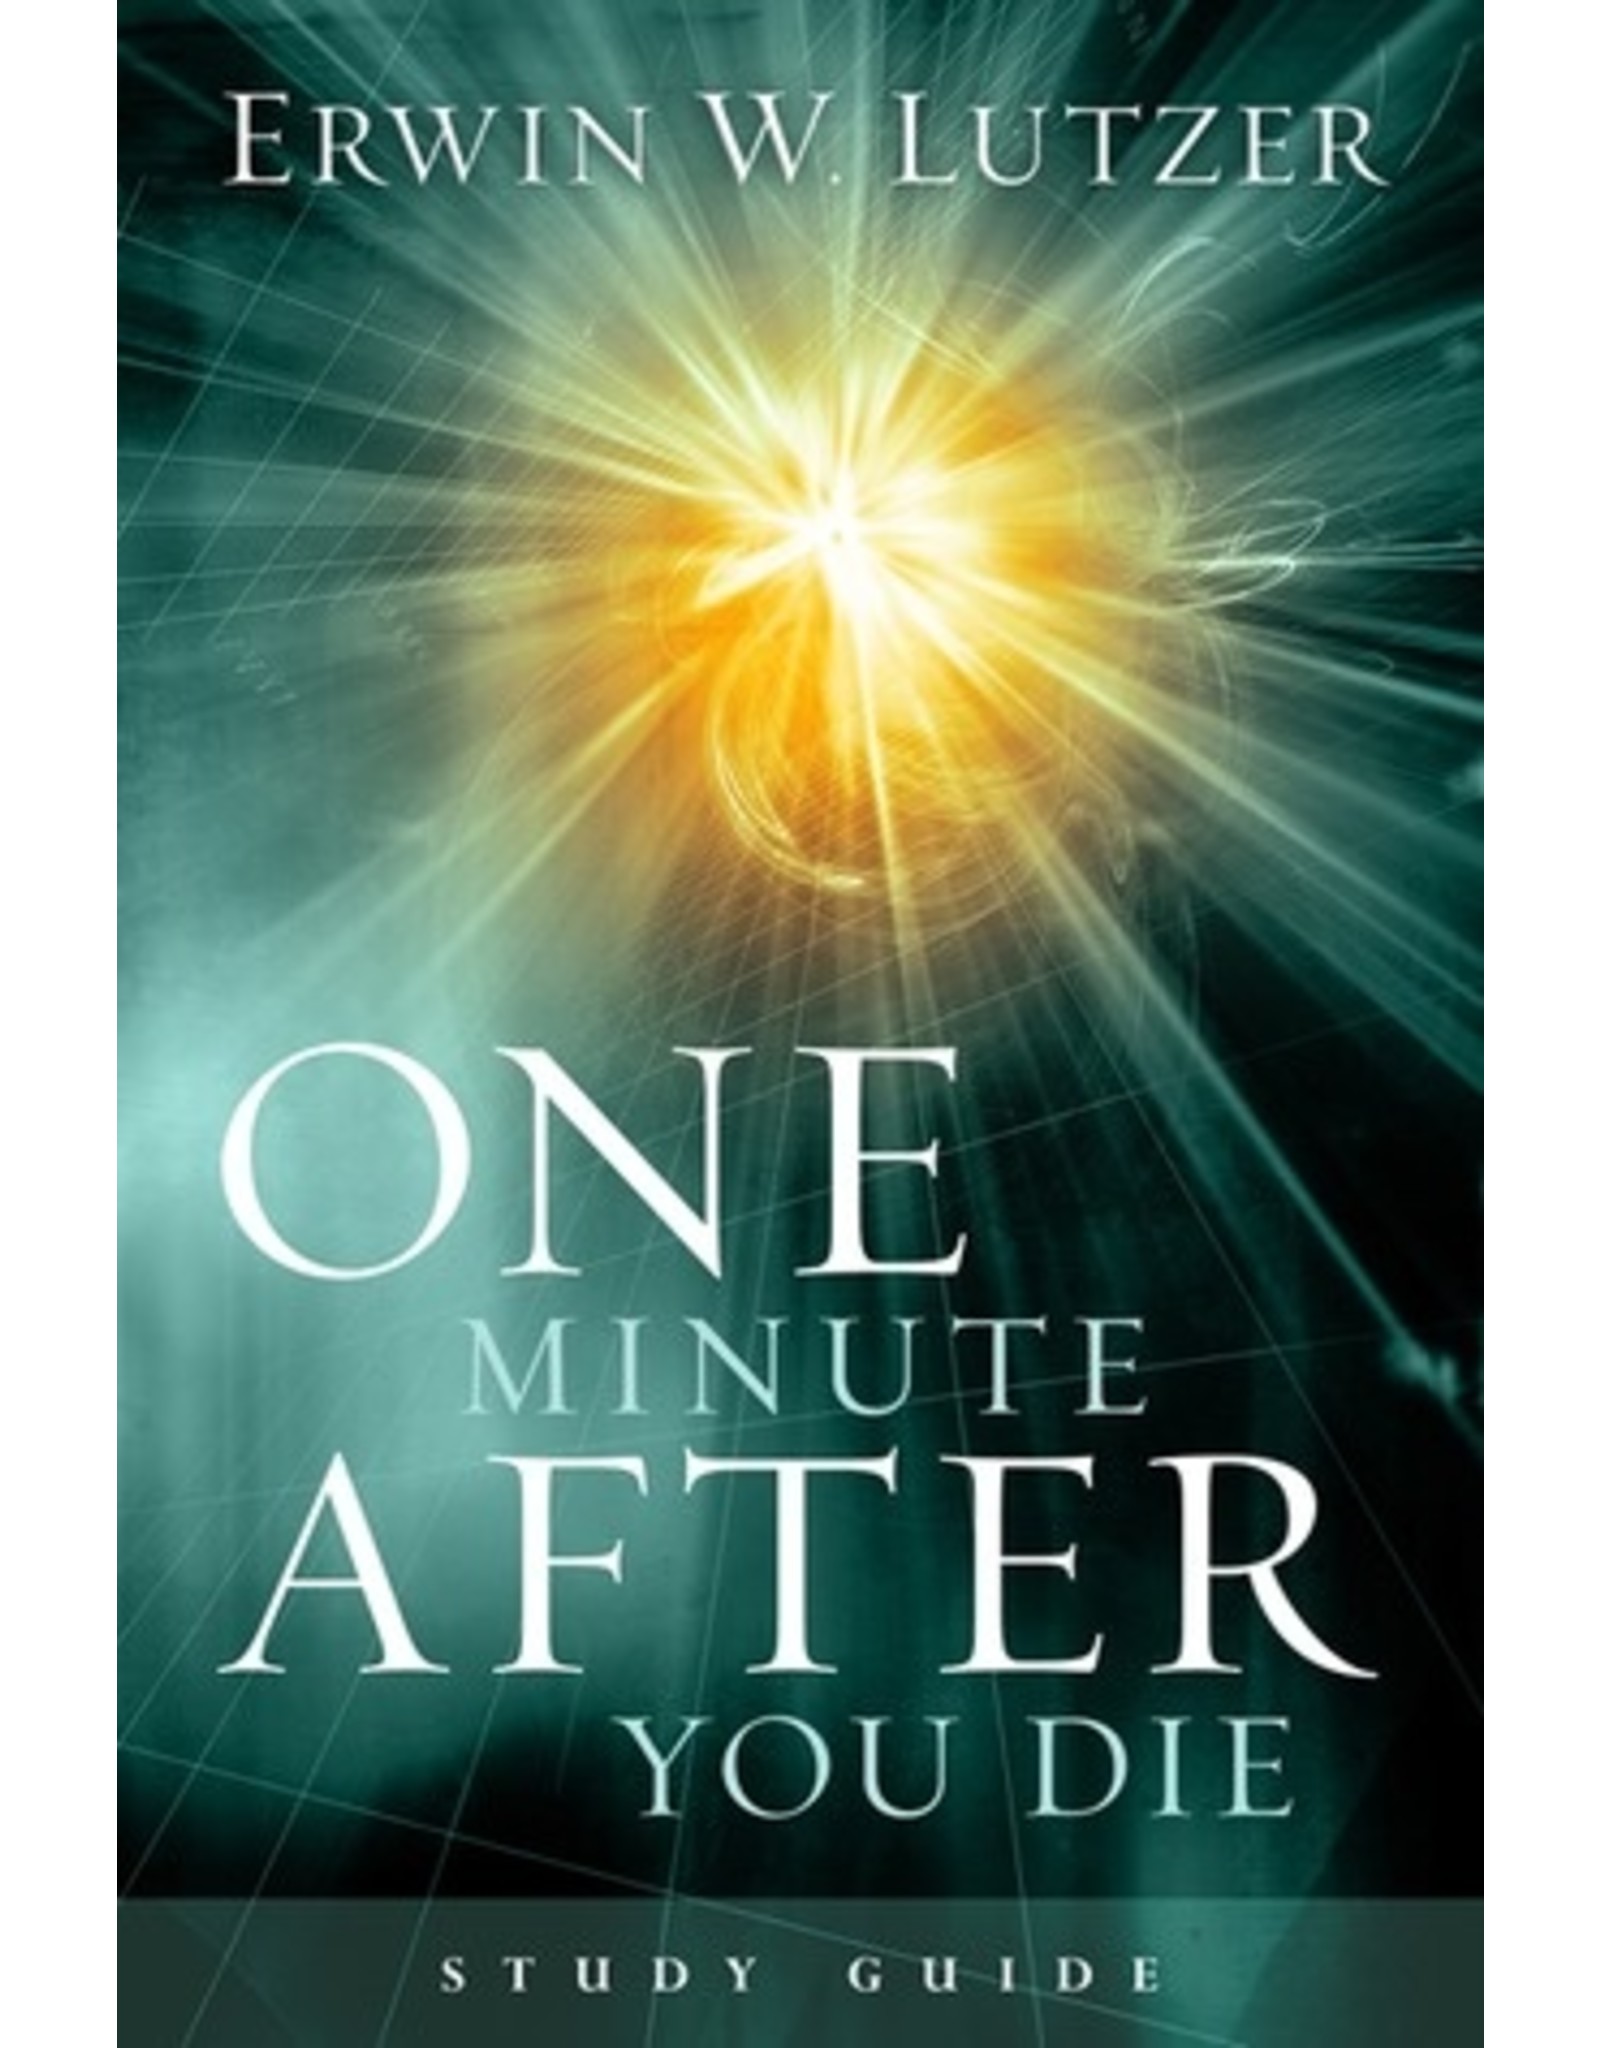 Erwin W Lutzer One Minute After You Die, Study Guide